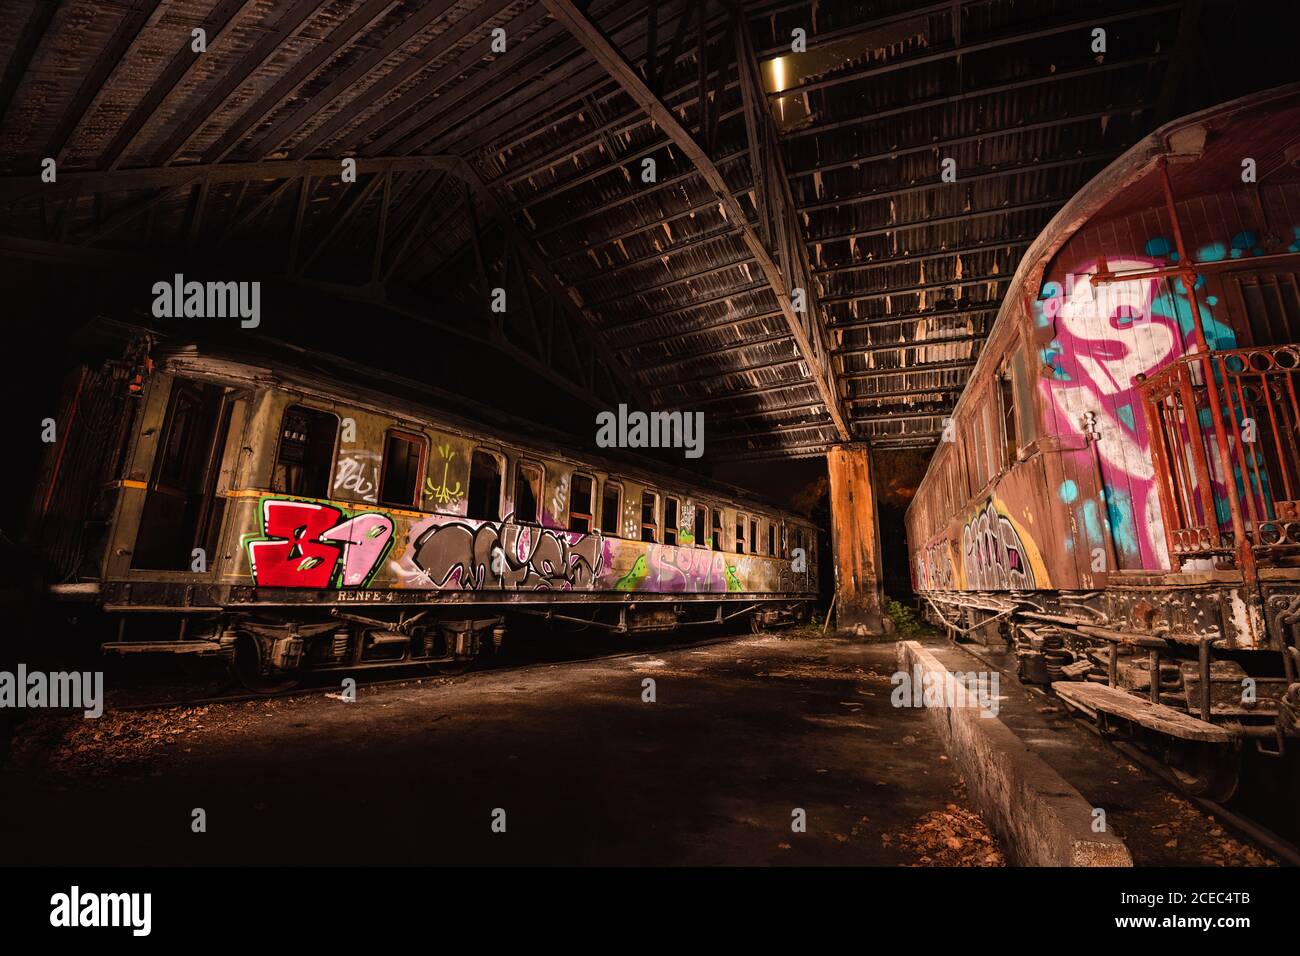 Old abandoned wagons with graffiti on surface standing in roofed depot Stock Photo